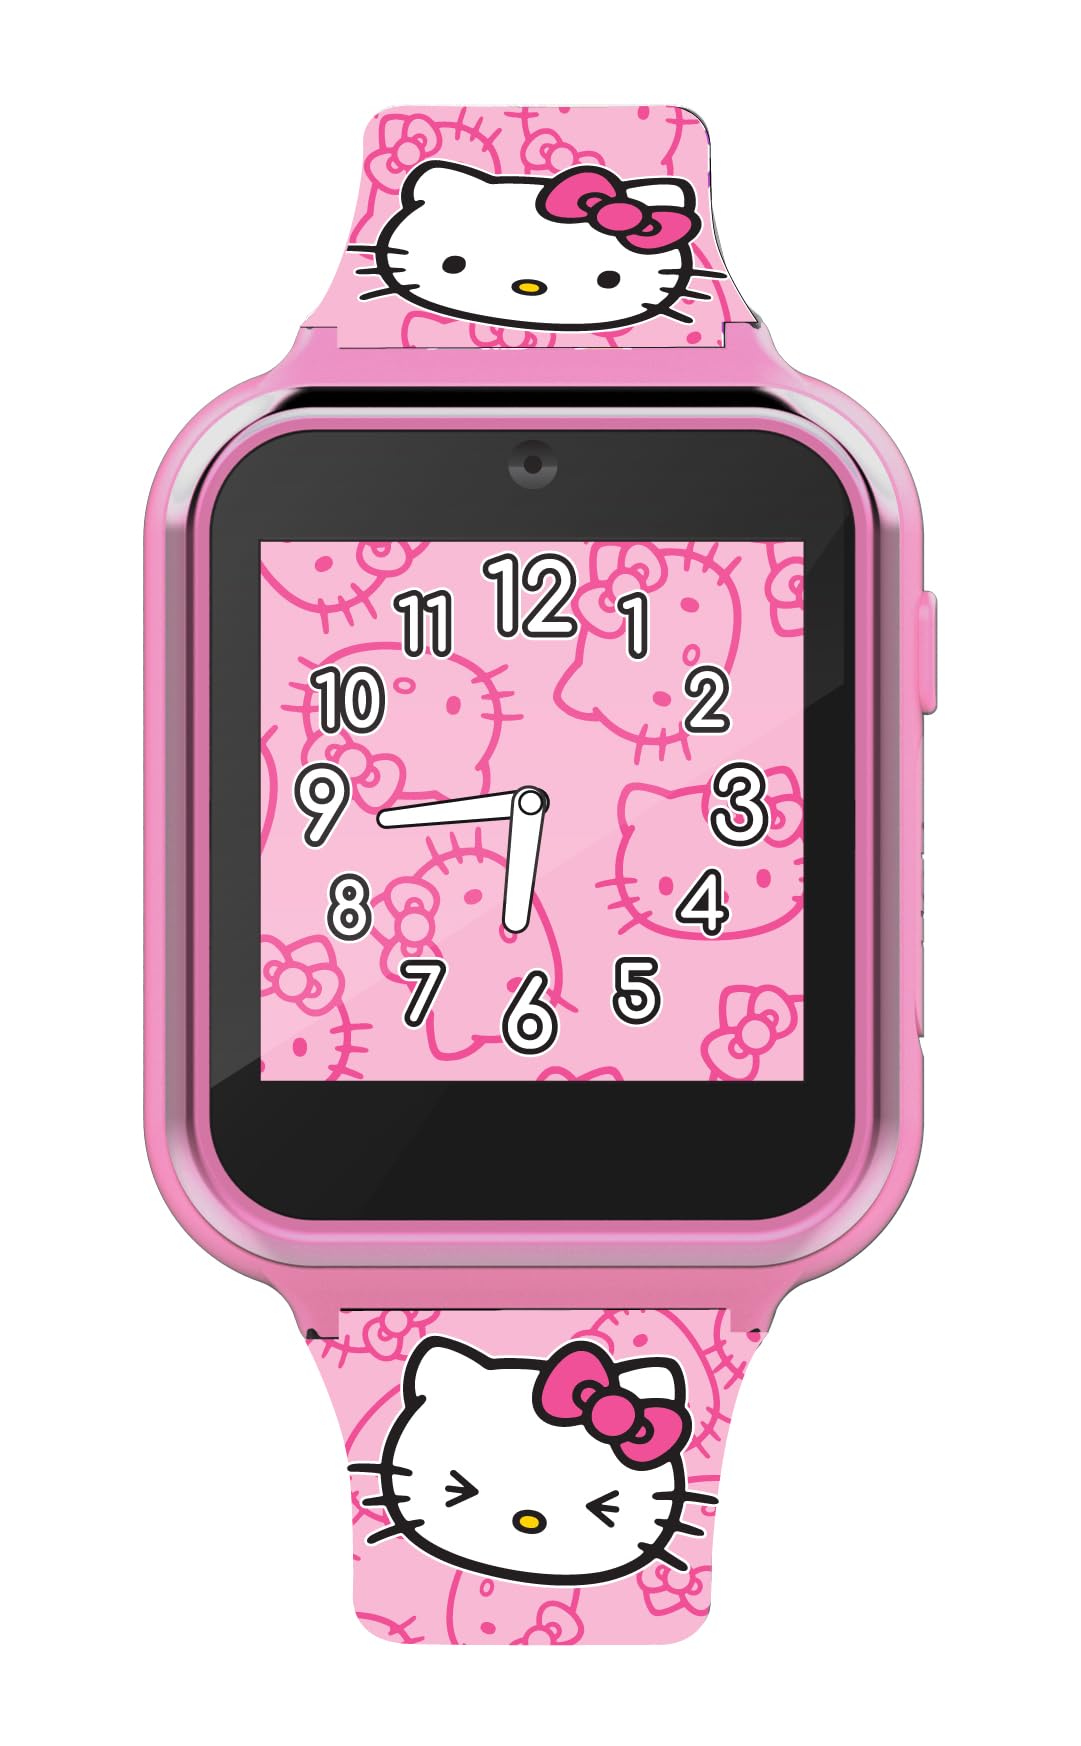 Accutime Hello Kitty Pink Educational Learning Touchscreen Kids Smart Watch - Toy for Girls, Boys, Toddlers - Selfie Cam, Learning Games, Alarm, Calculator, Pedometer & More (Model: HK4185)